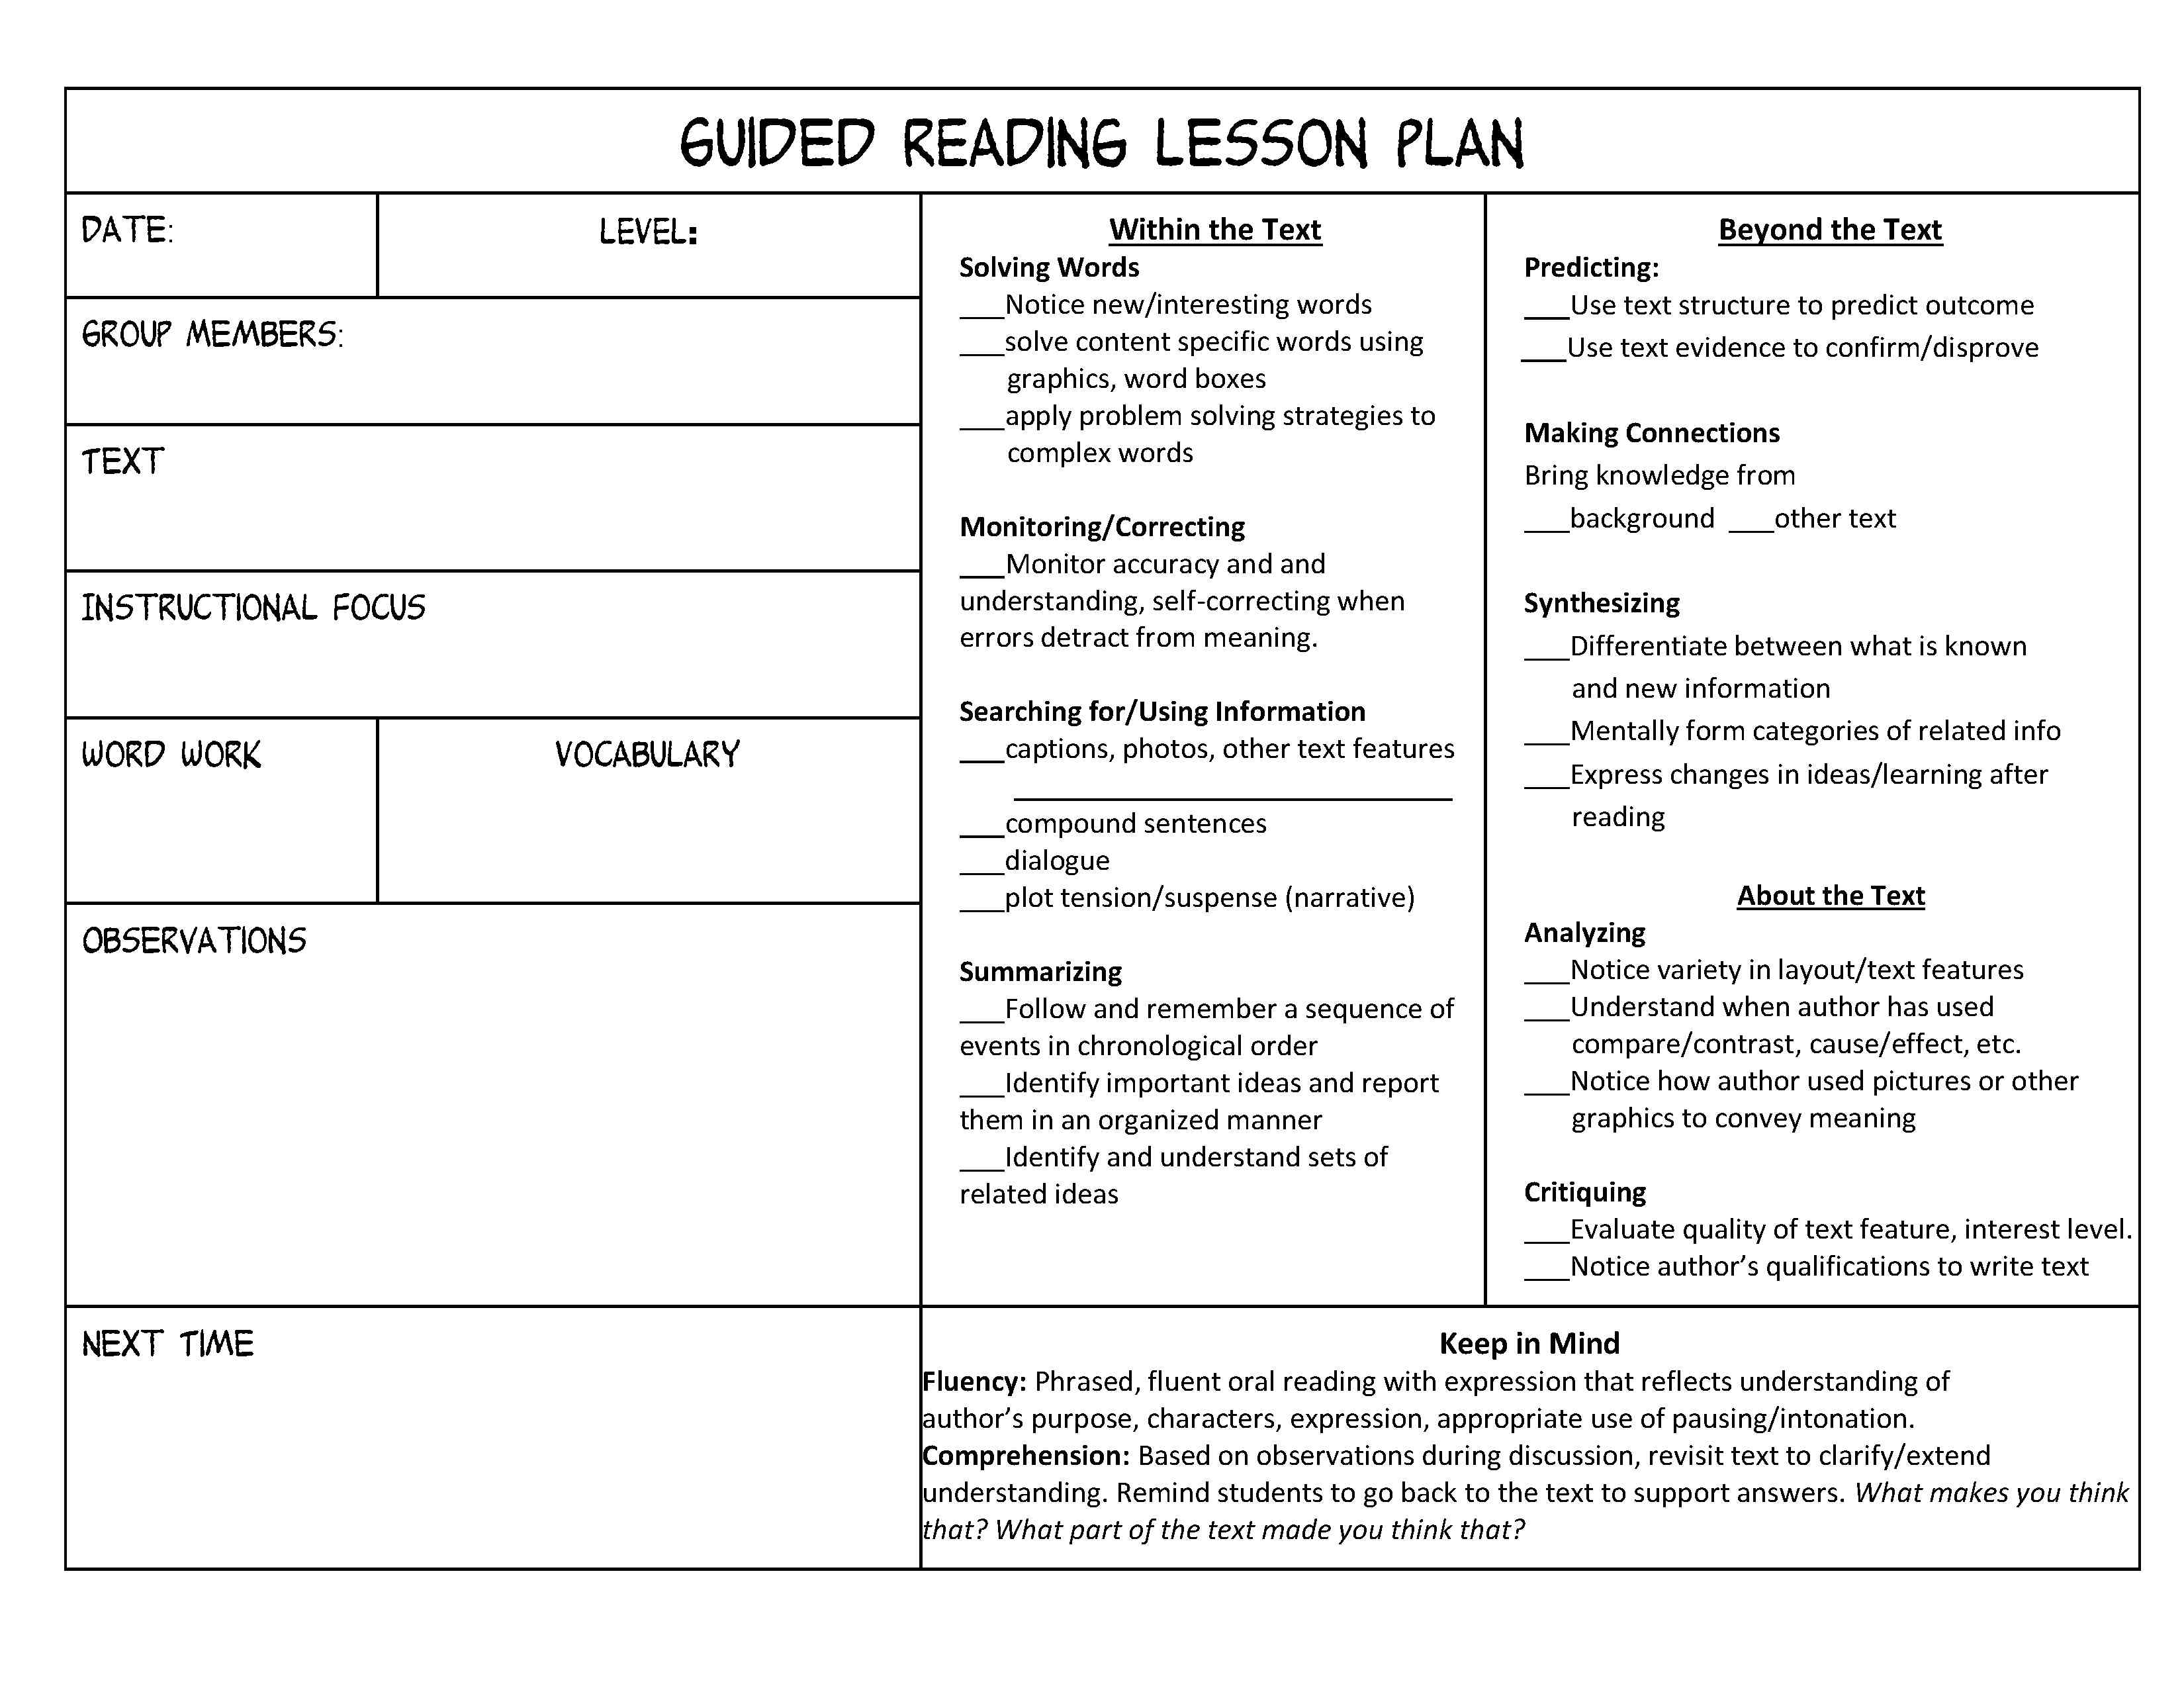 guided-reading-organization-made-easy-scholastic